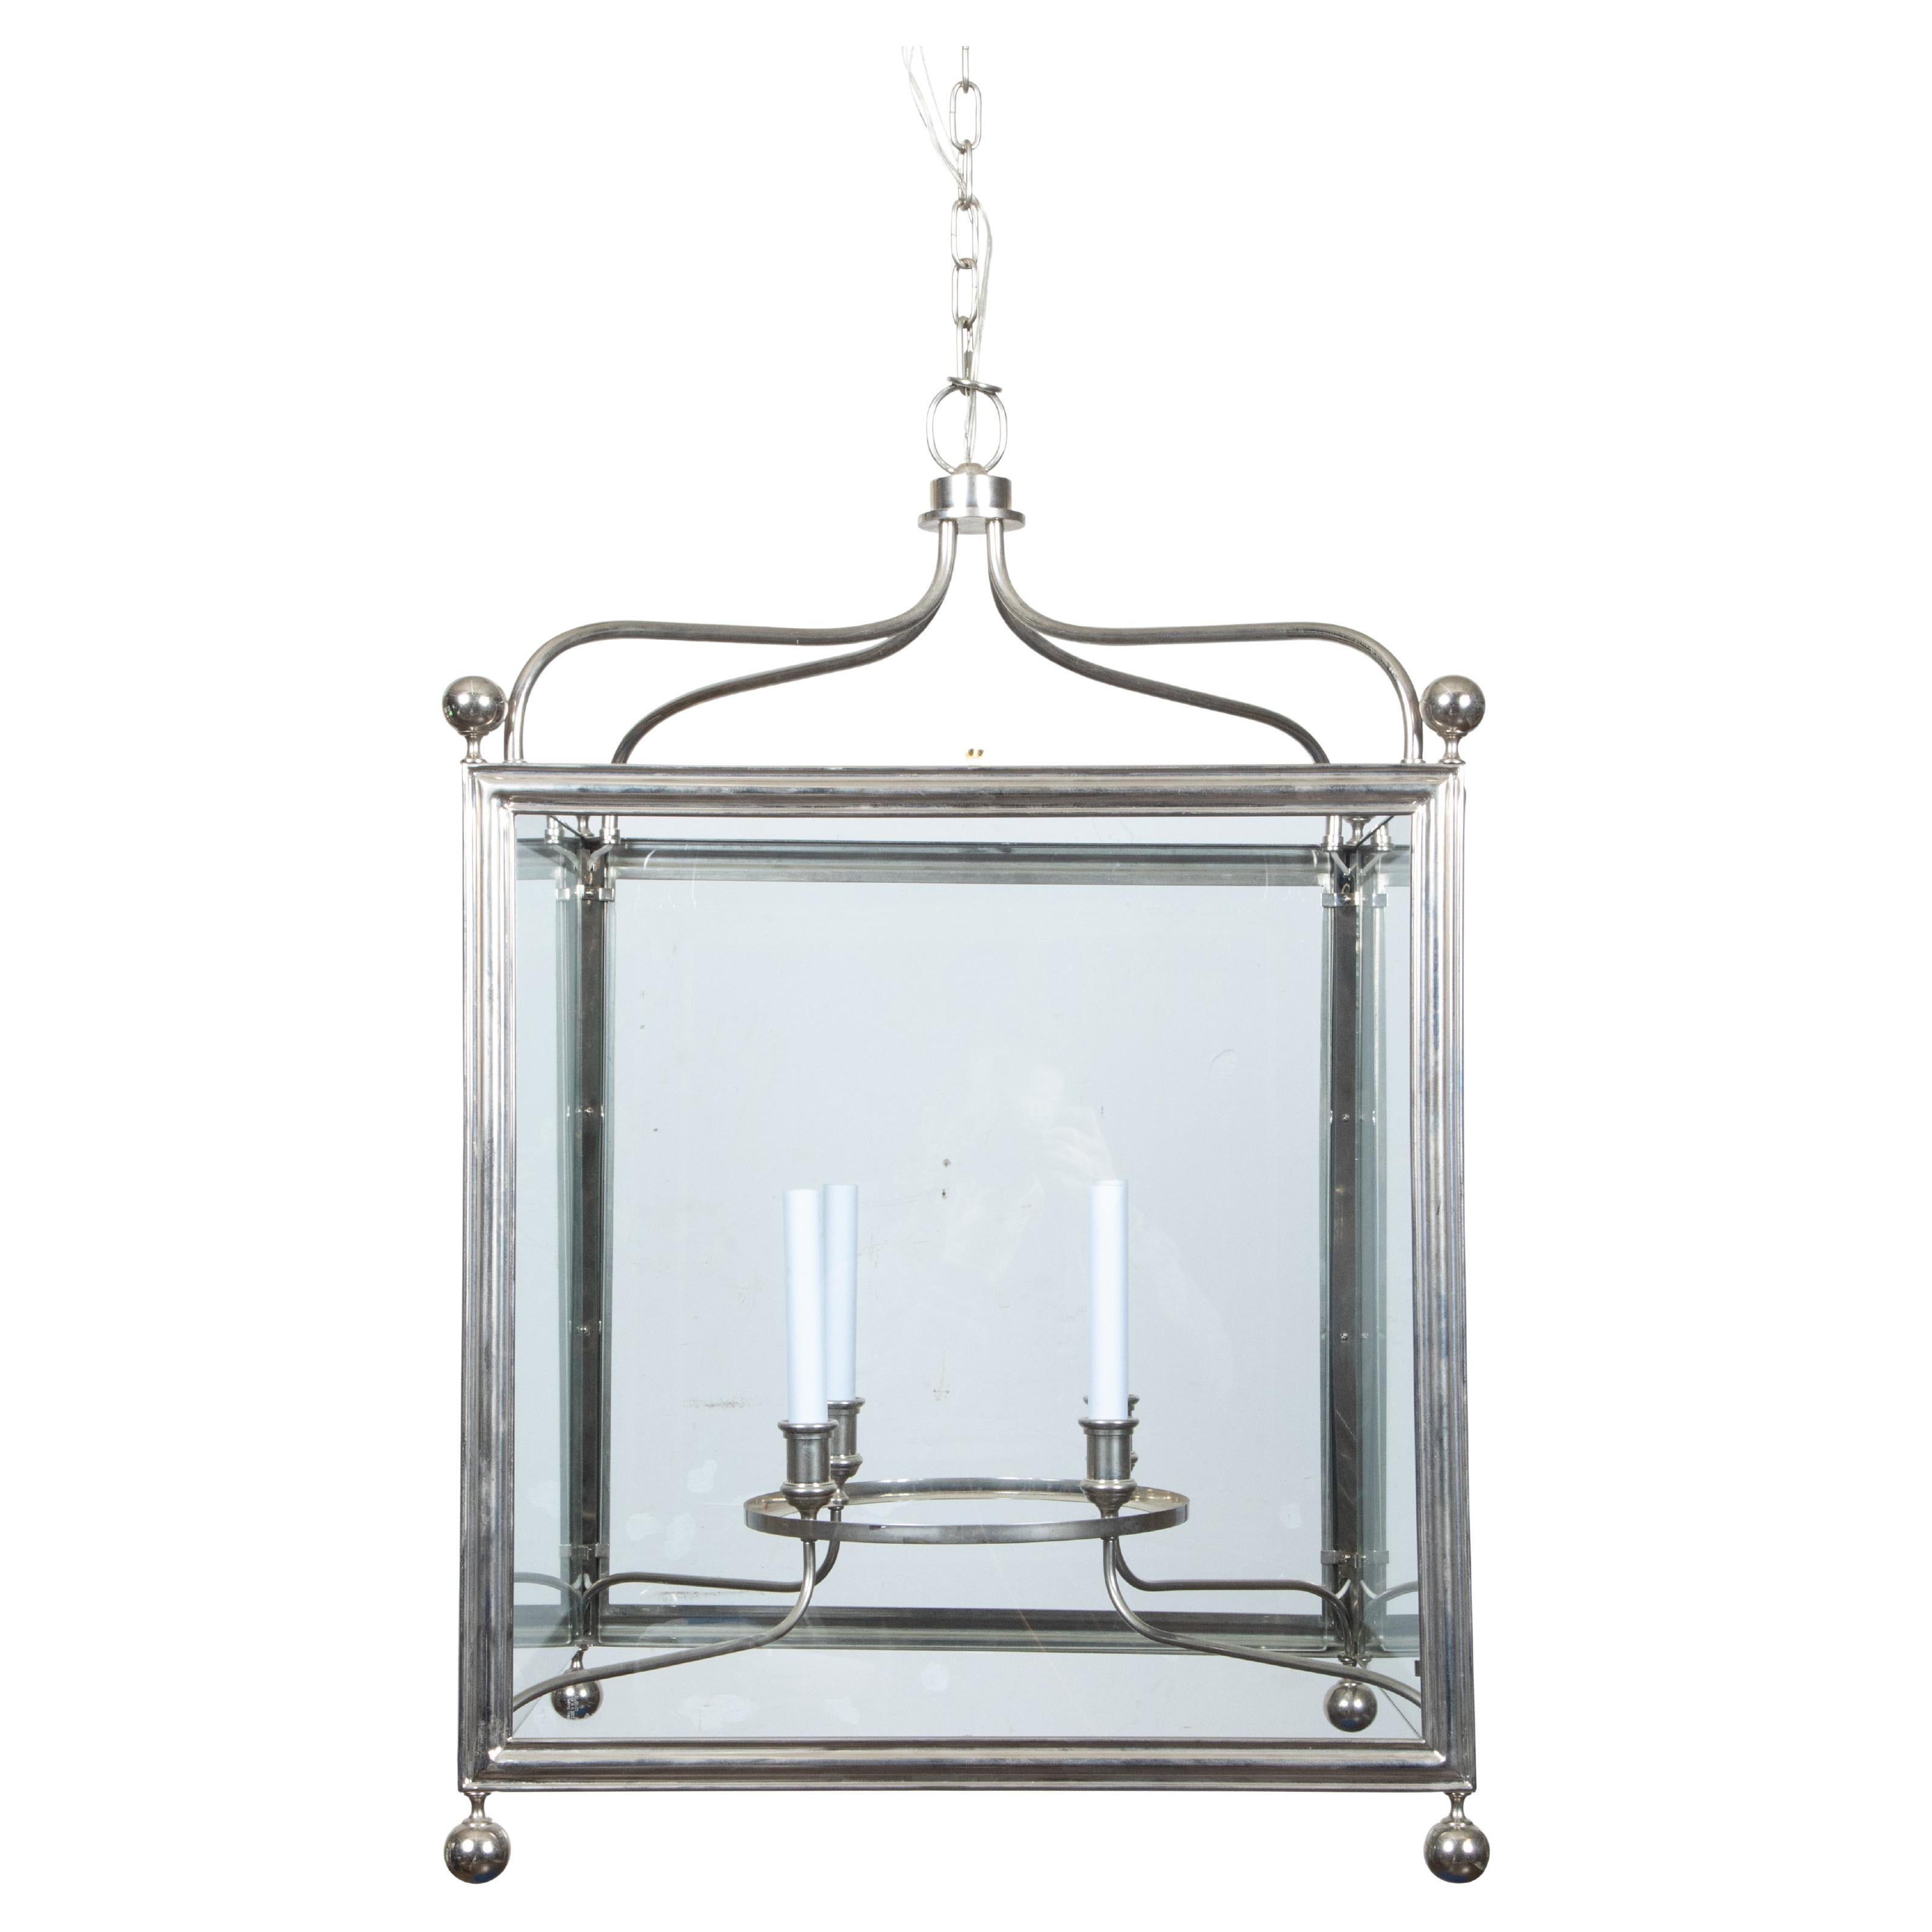 English Midcentury Four-Light Lantern with Silver Color and Petite Spheres For Sale